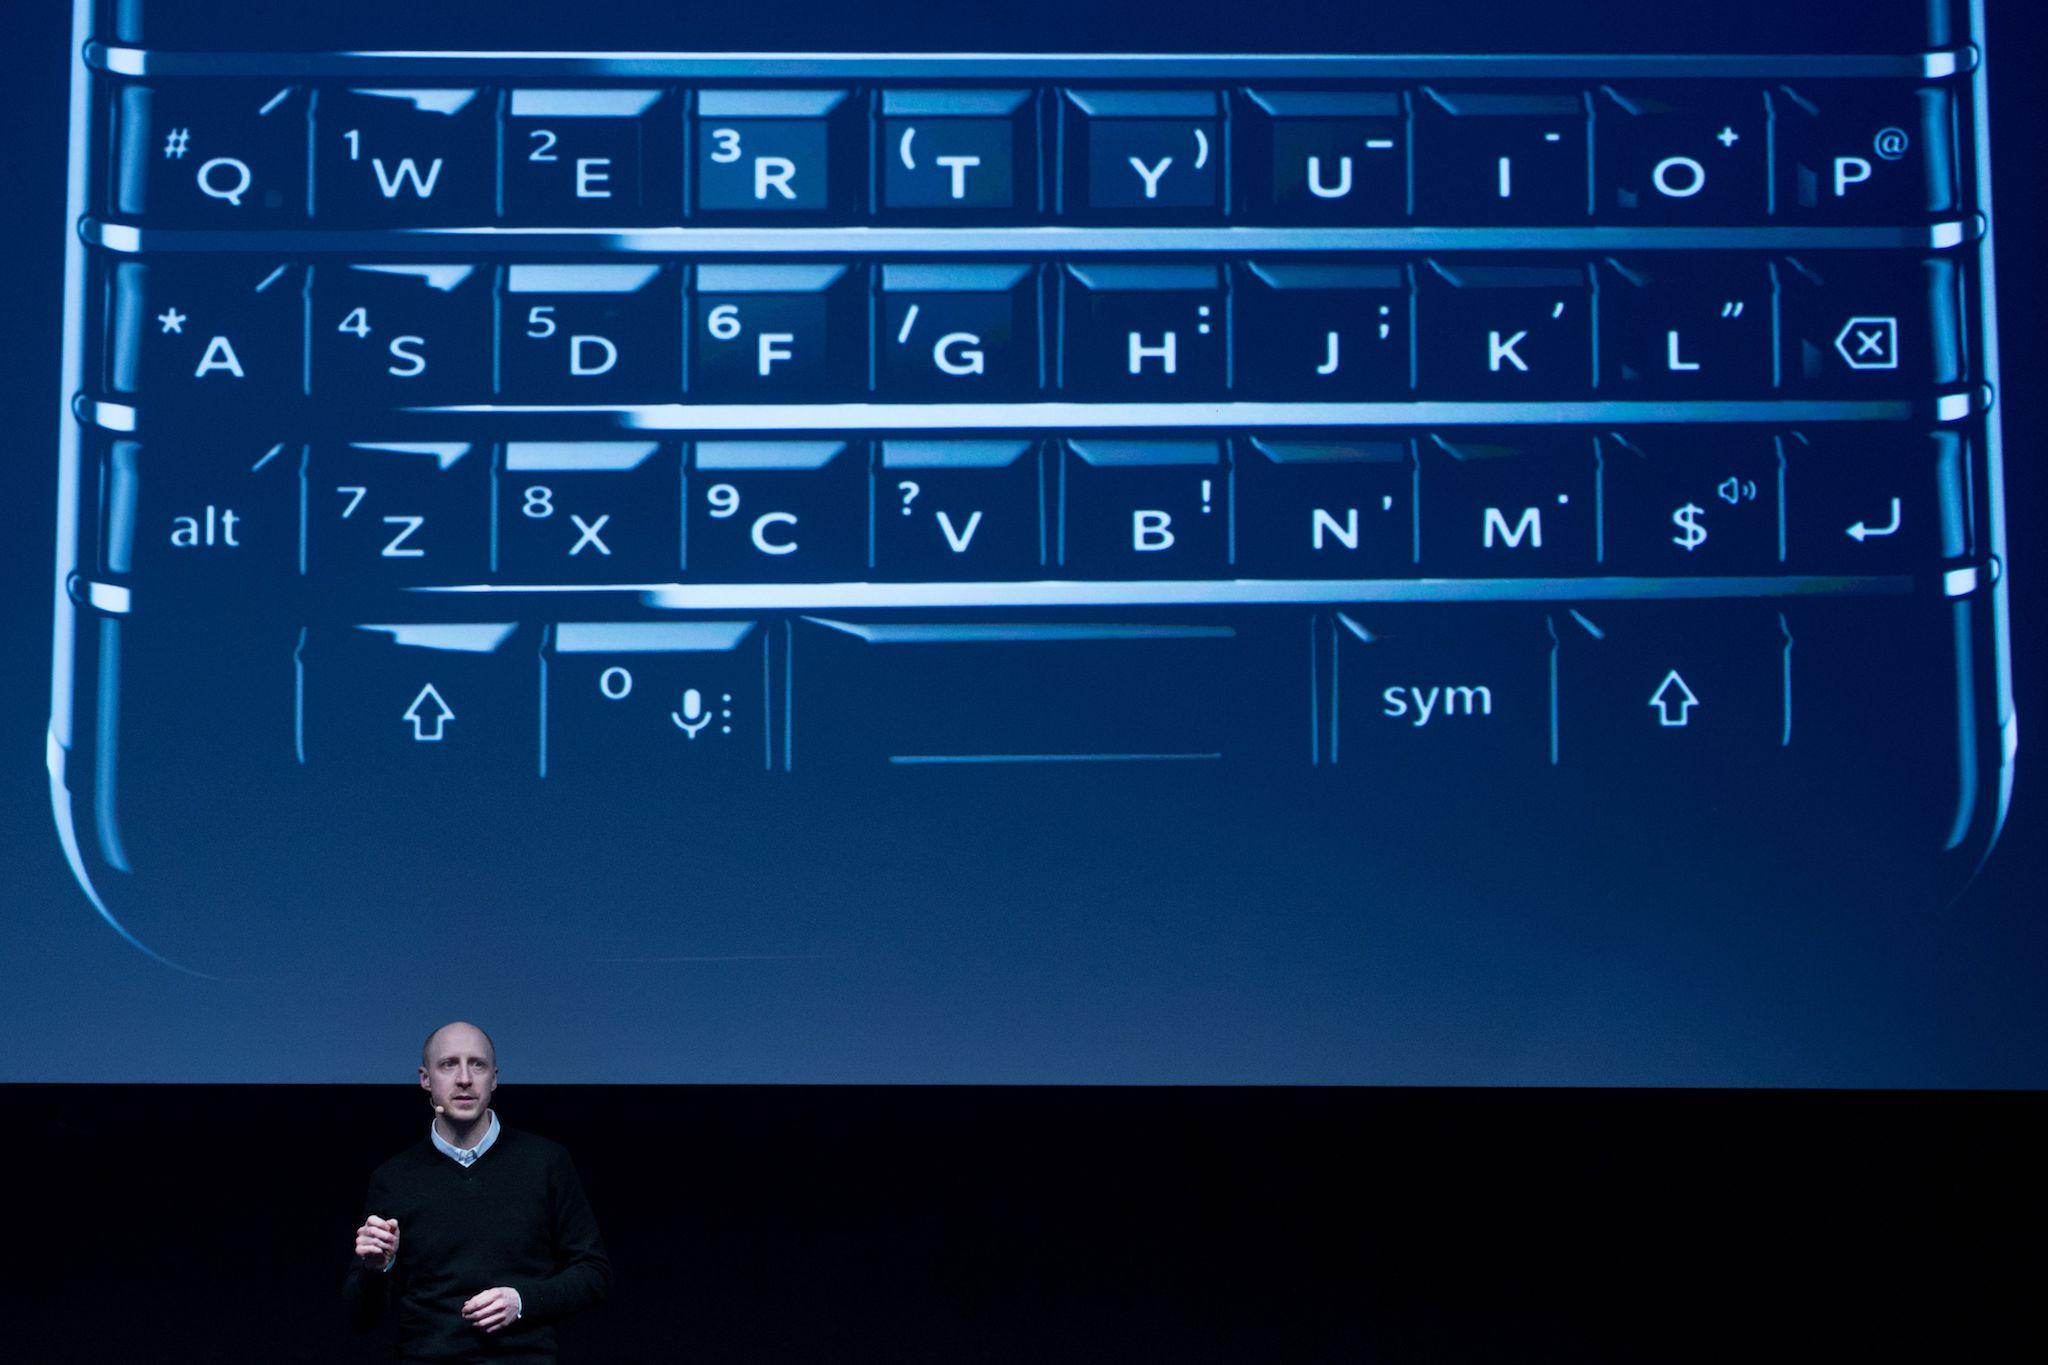 Senior product manager blackberry mobile Logan Bell speaks during a presentation to the new BlackBerry Key One at the Mobile World Congress centre in Barcelona